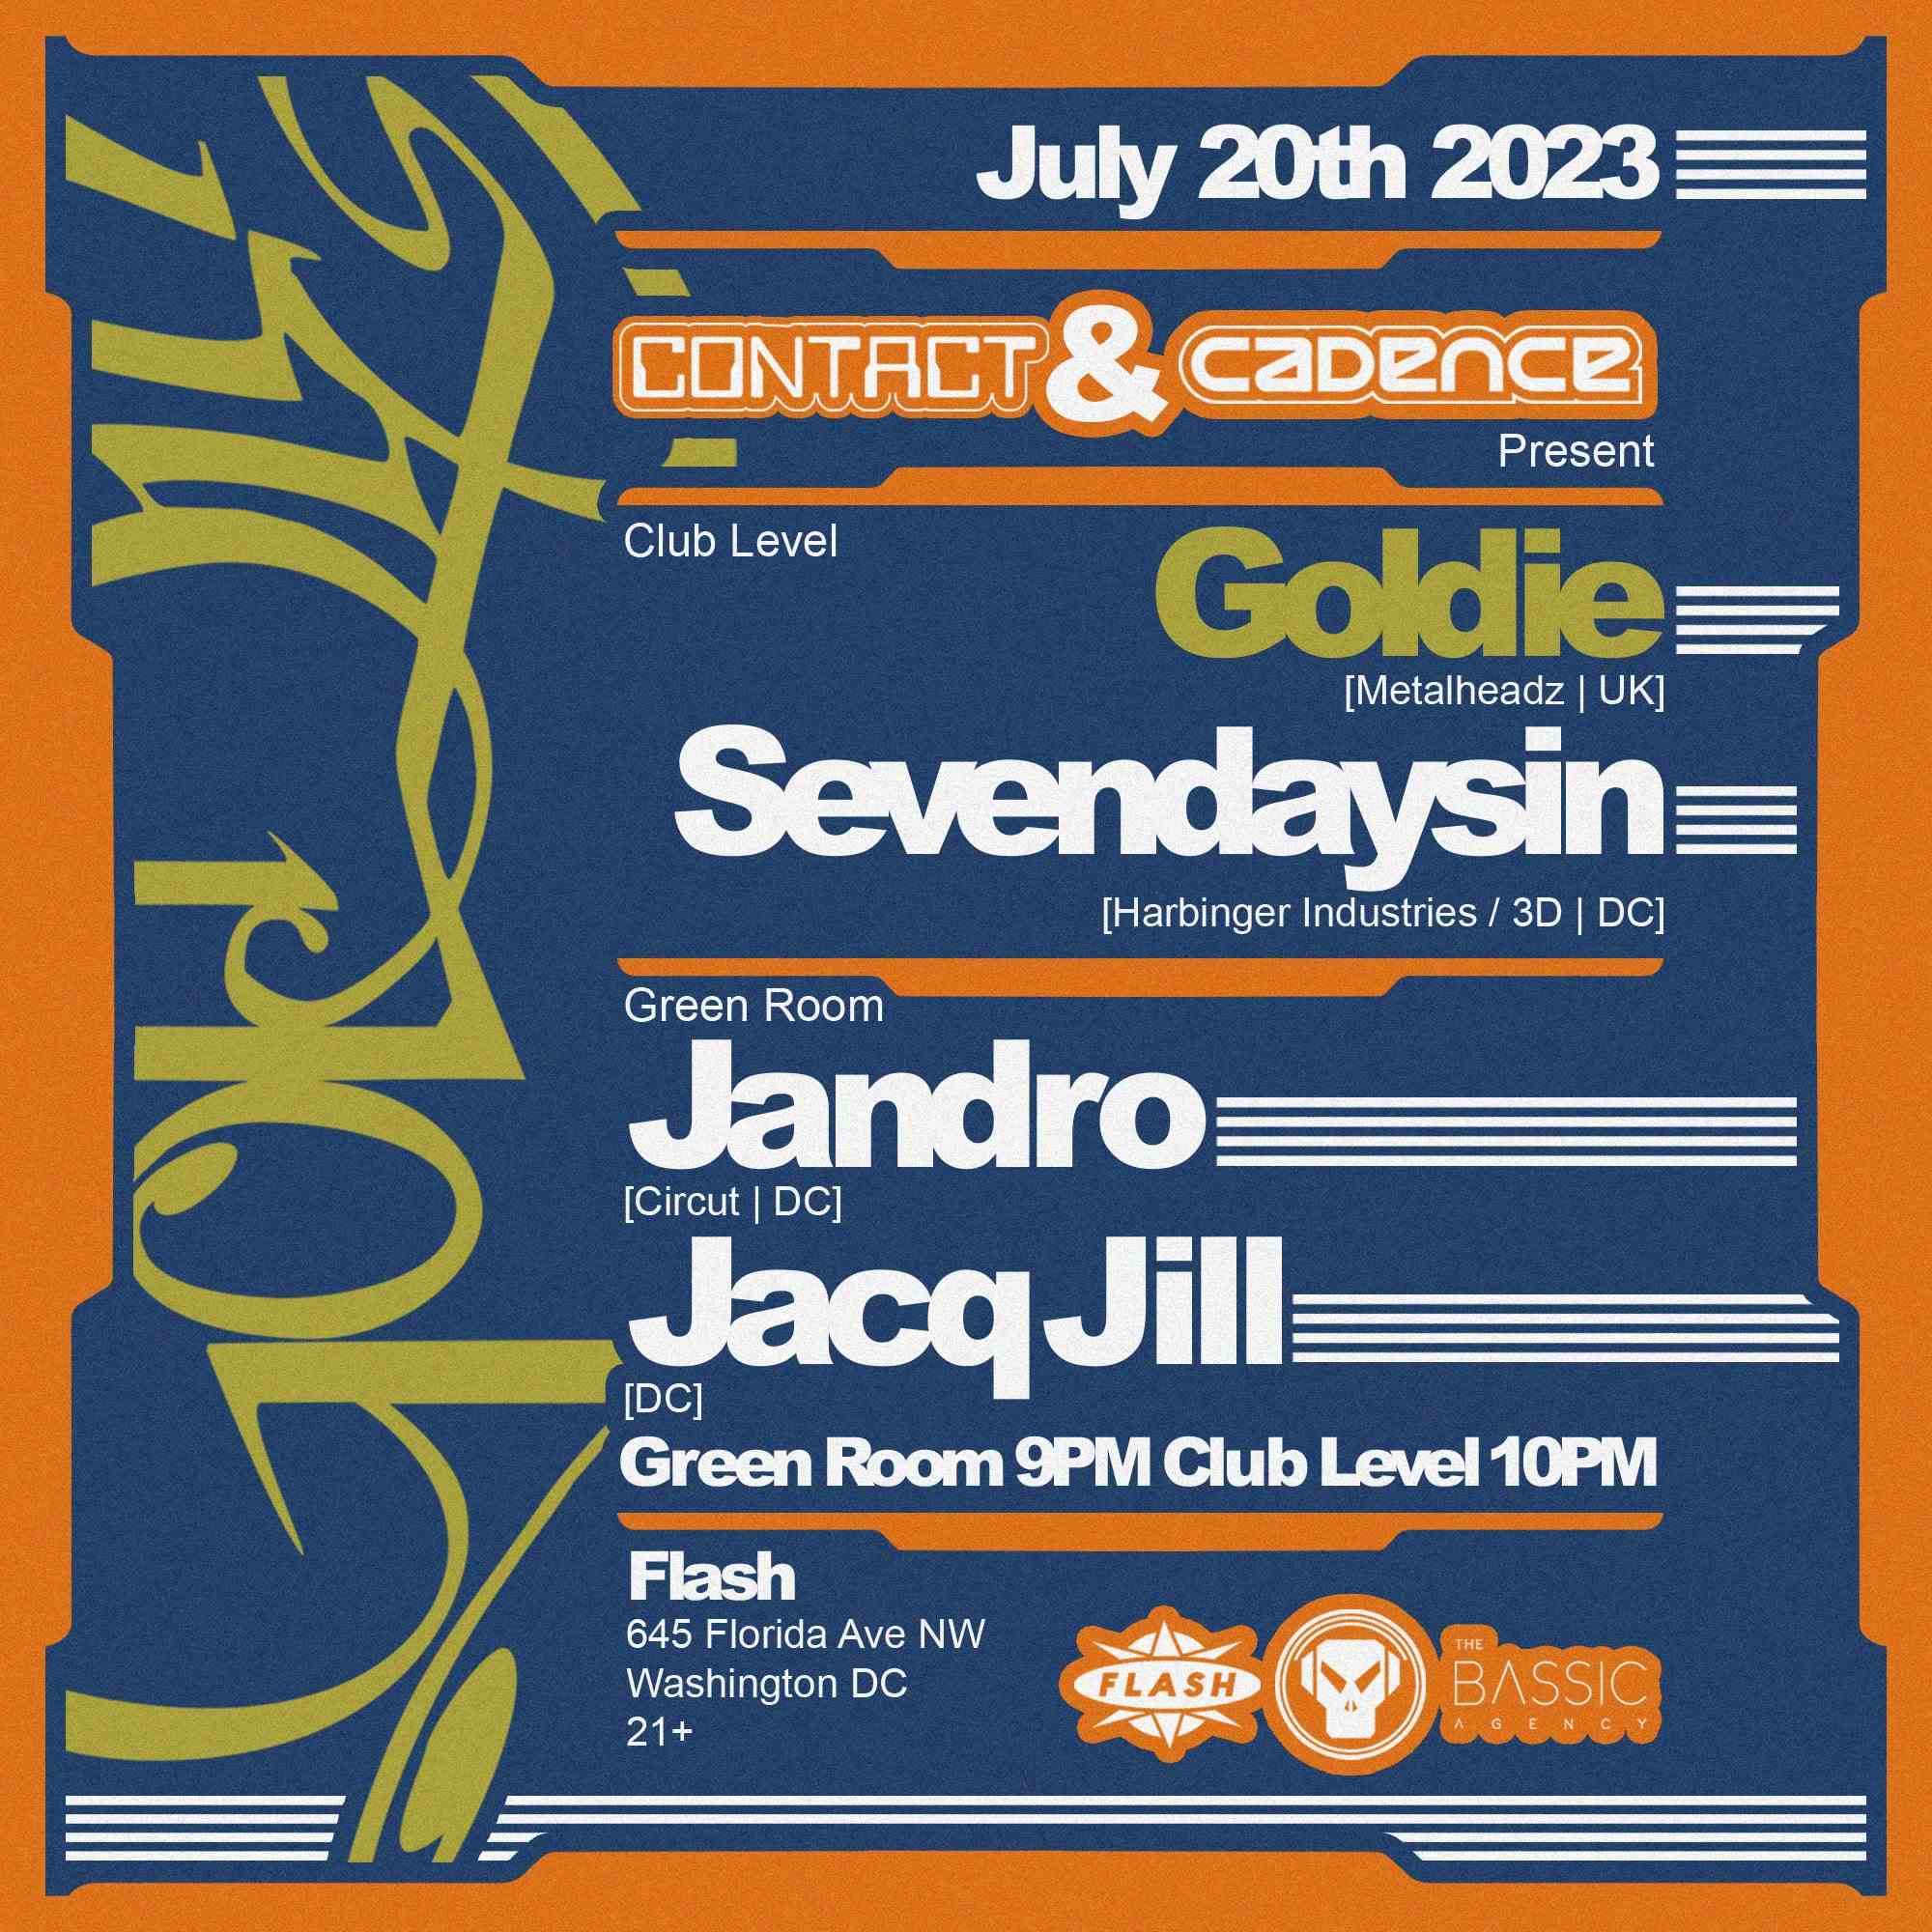 CONTACT x Cadence: Goldie event flyer